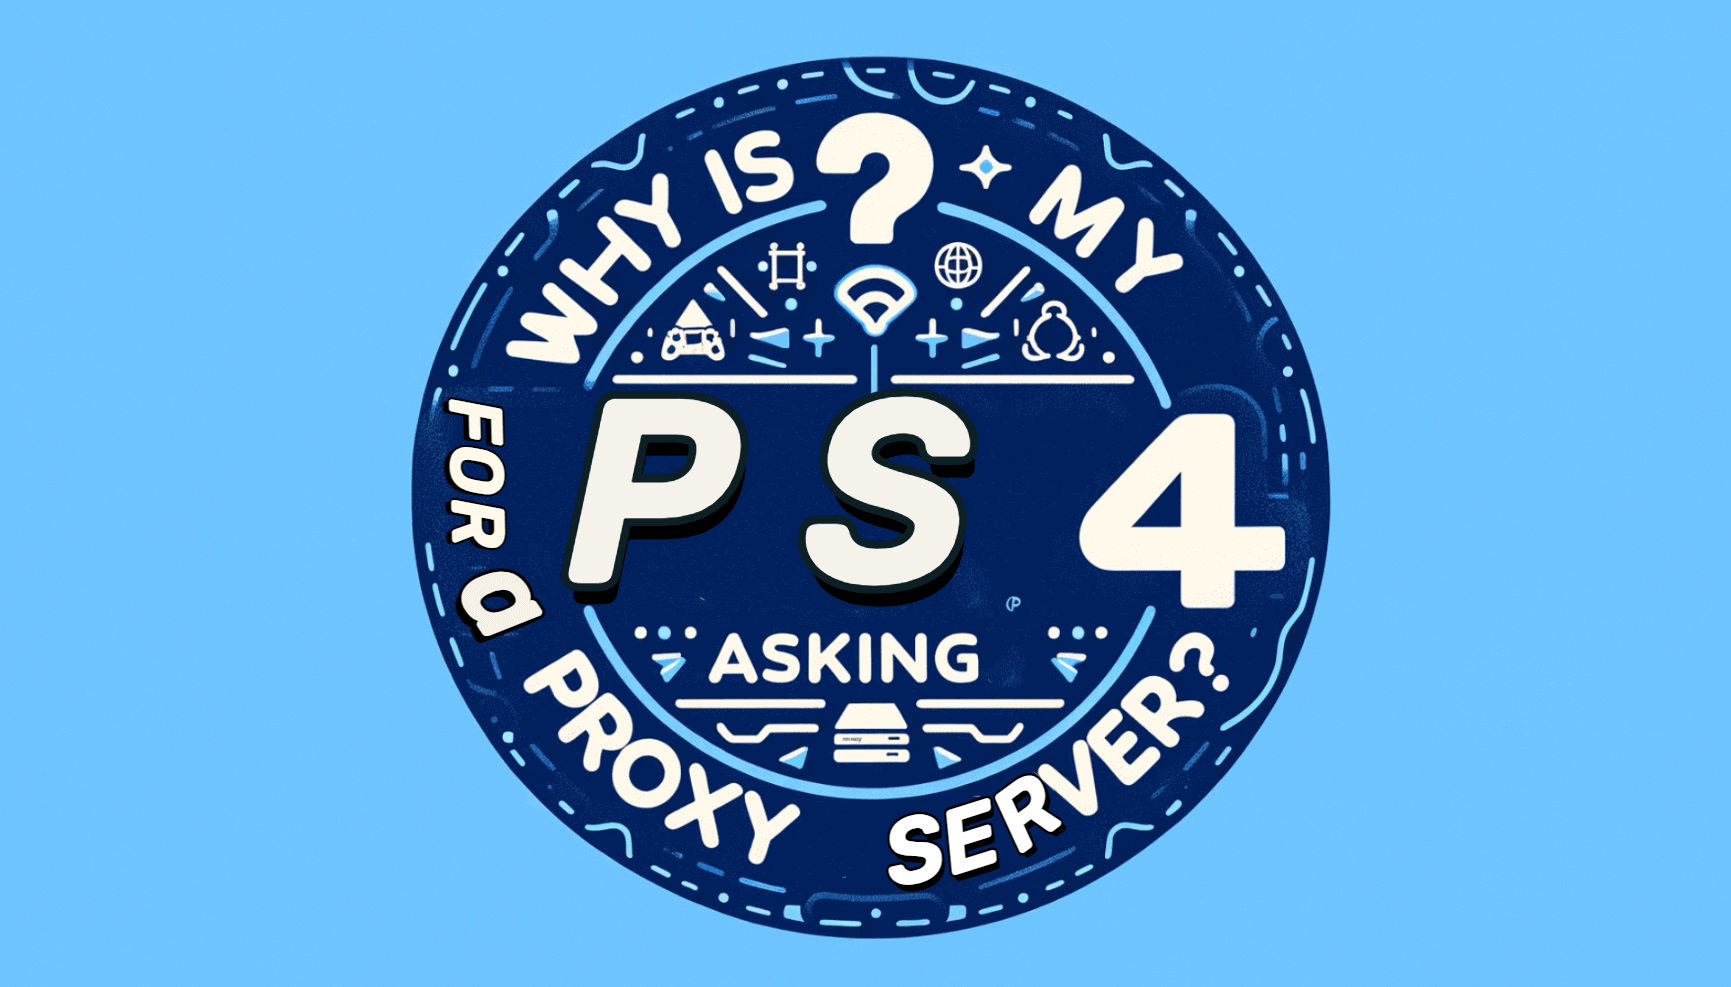 How to Use Proxy Server on PS4